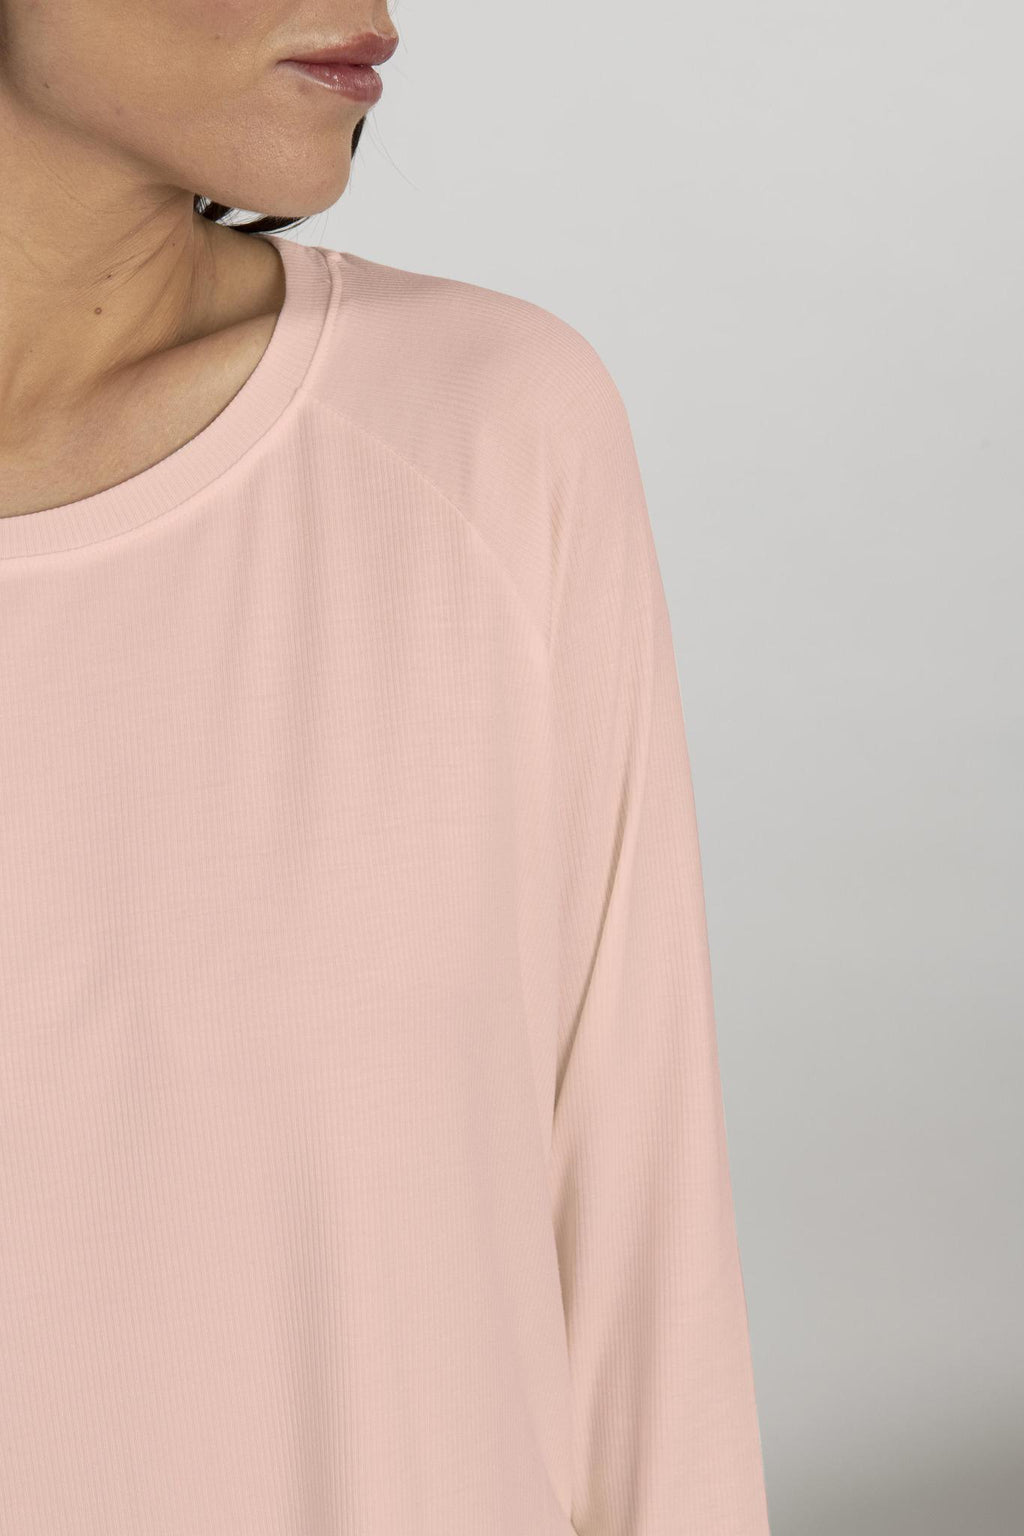 Ribbed long sleeve top in peach